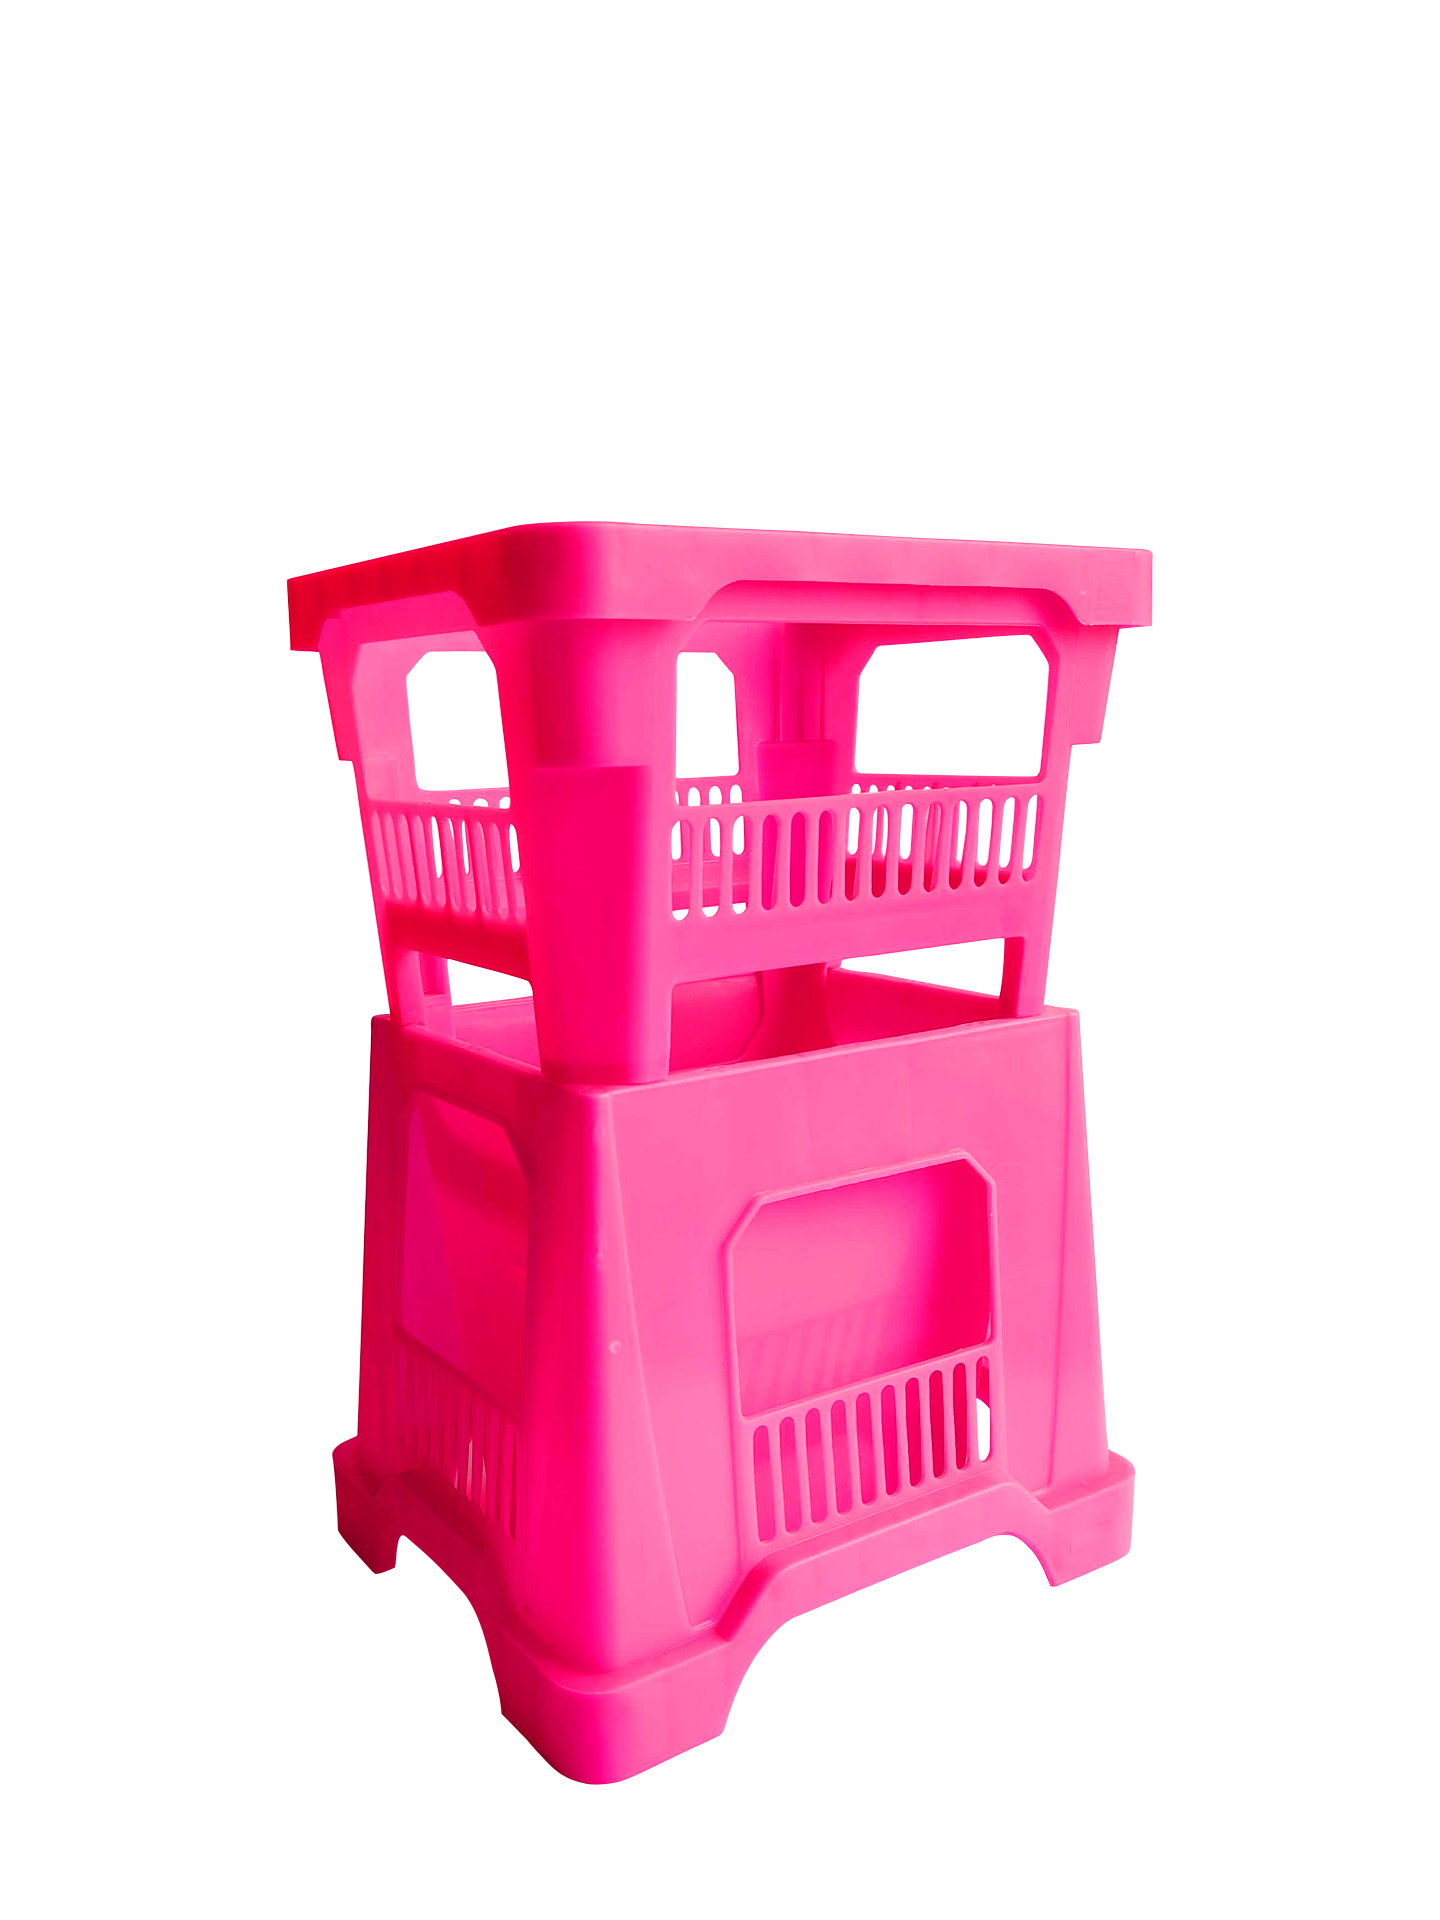 The Fluorecent pink Florist vase is hot neon pink that will light your room a fire!